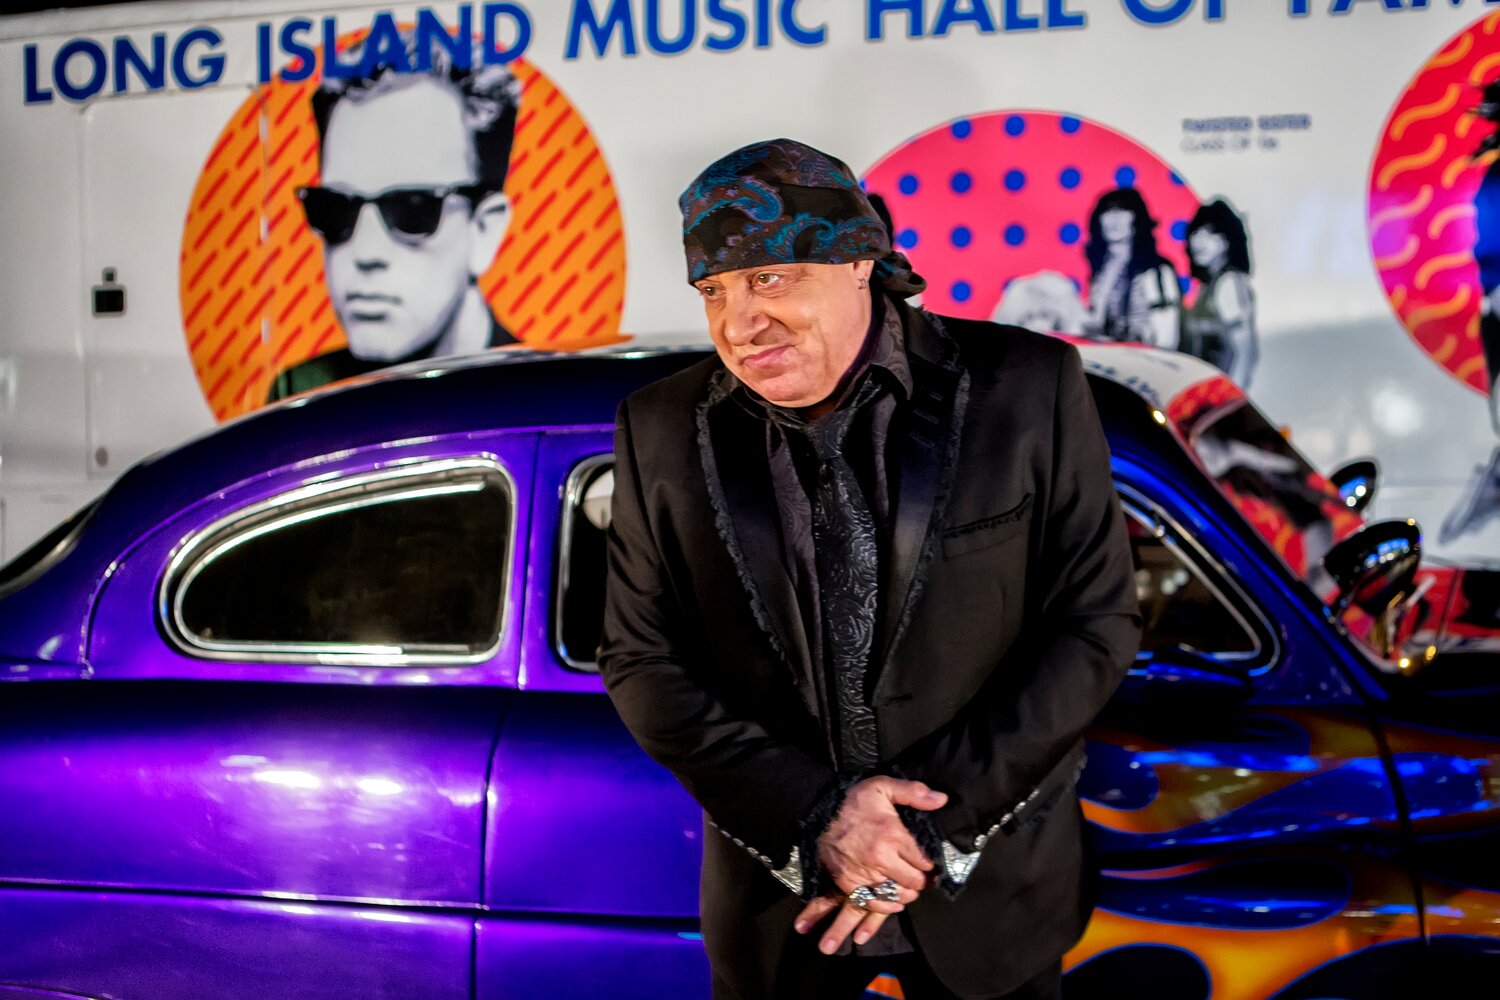 Stevie Van Zandt at a LIMEHoF event. The workshops, sponsored by Harmony Insurance, will be held at LIMEHoF’s Stony Brook location, aiming to engage teachers and enhance their teaching skills while integrating music into their lessons.